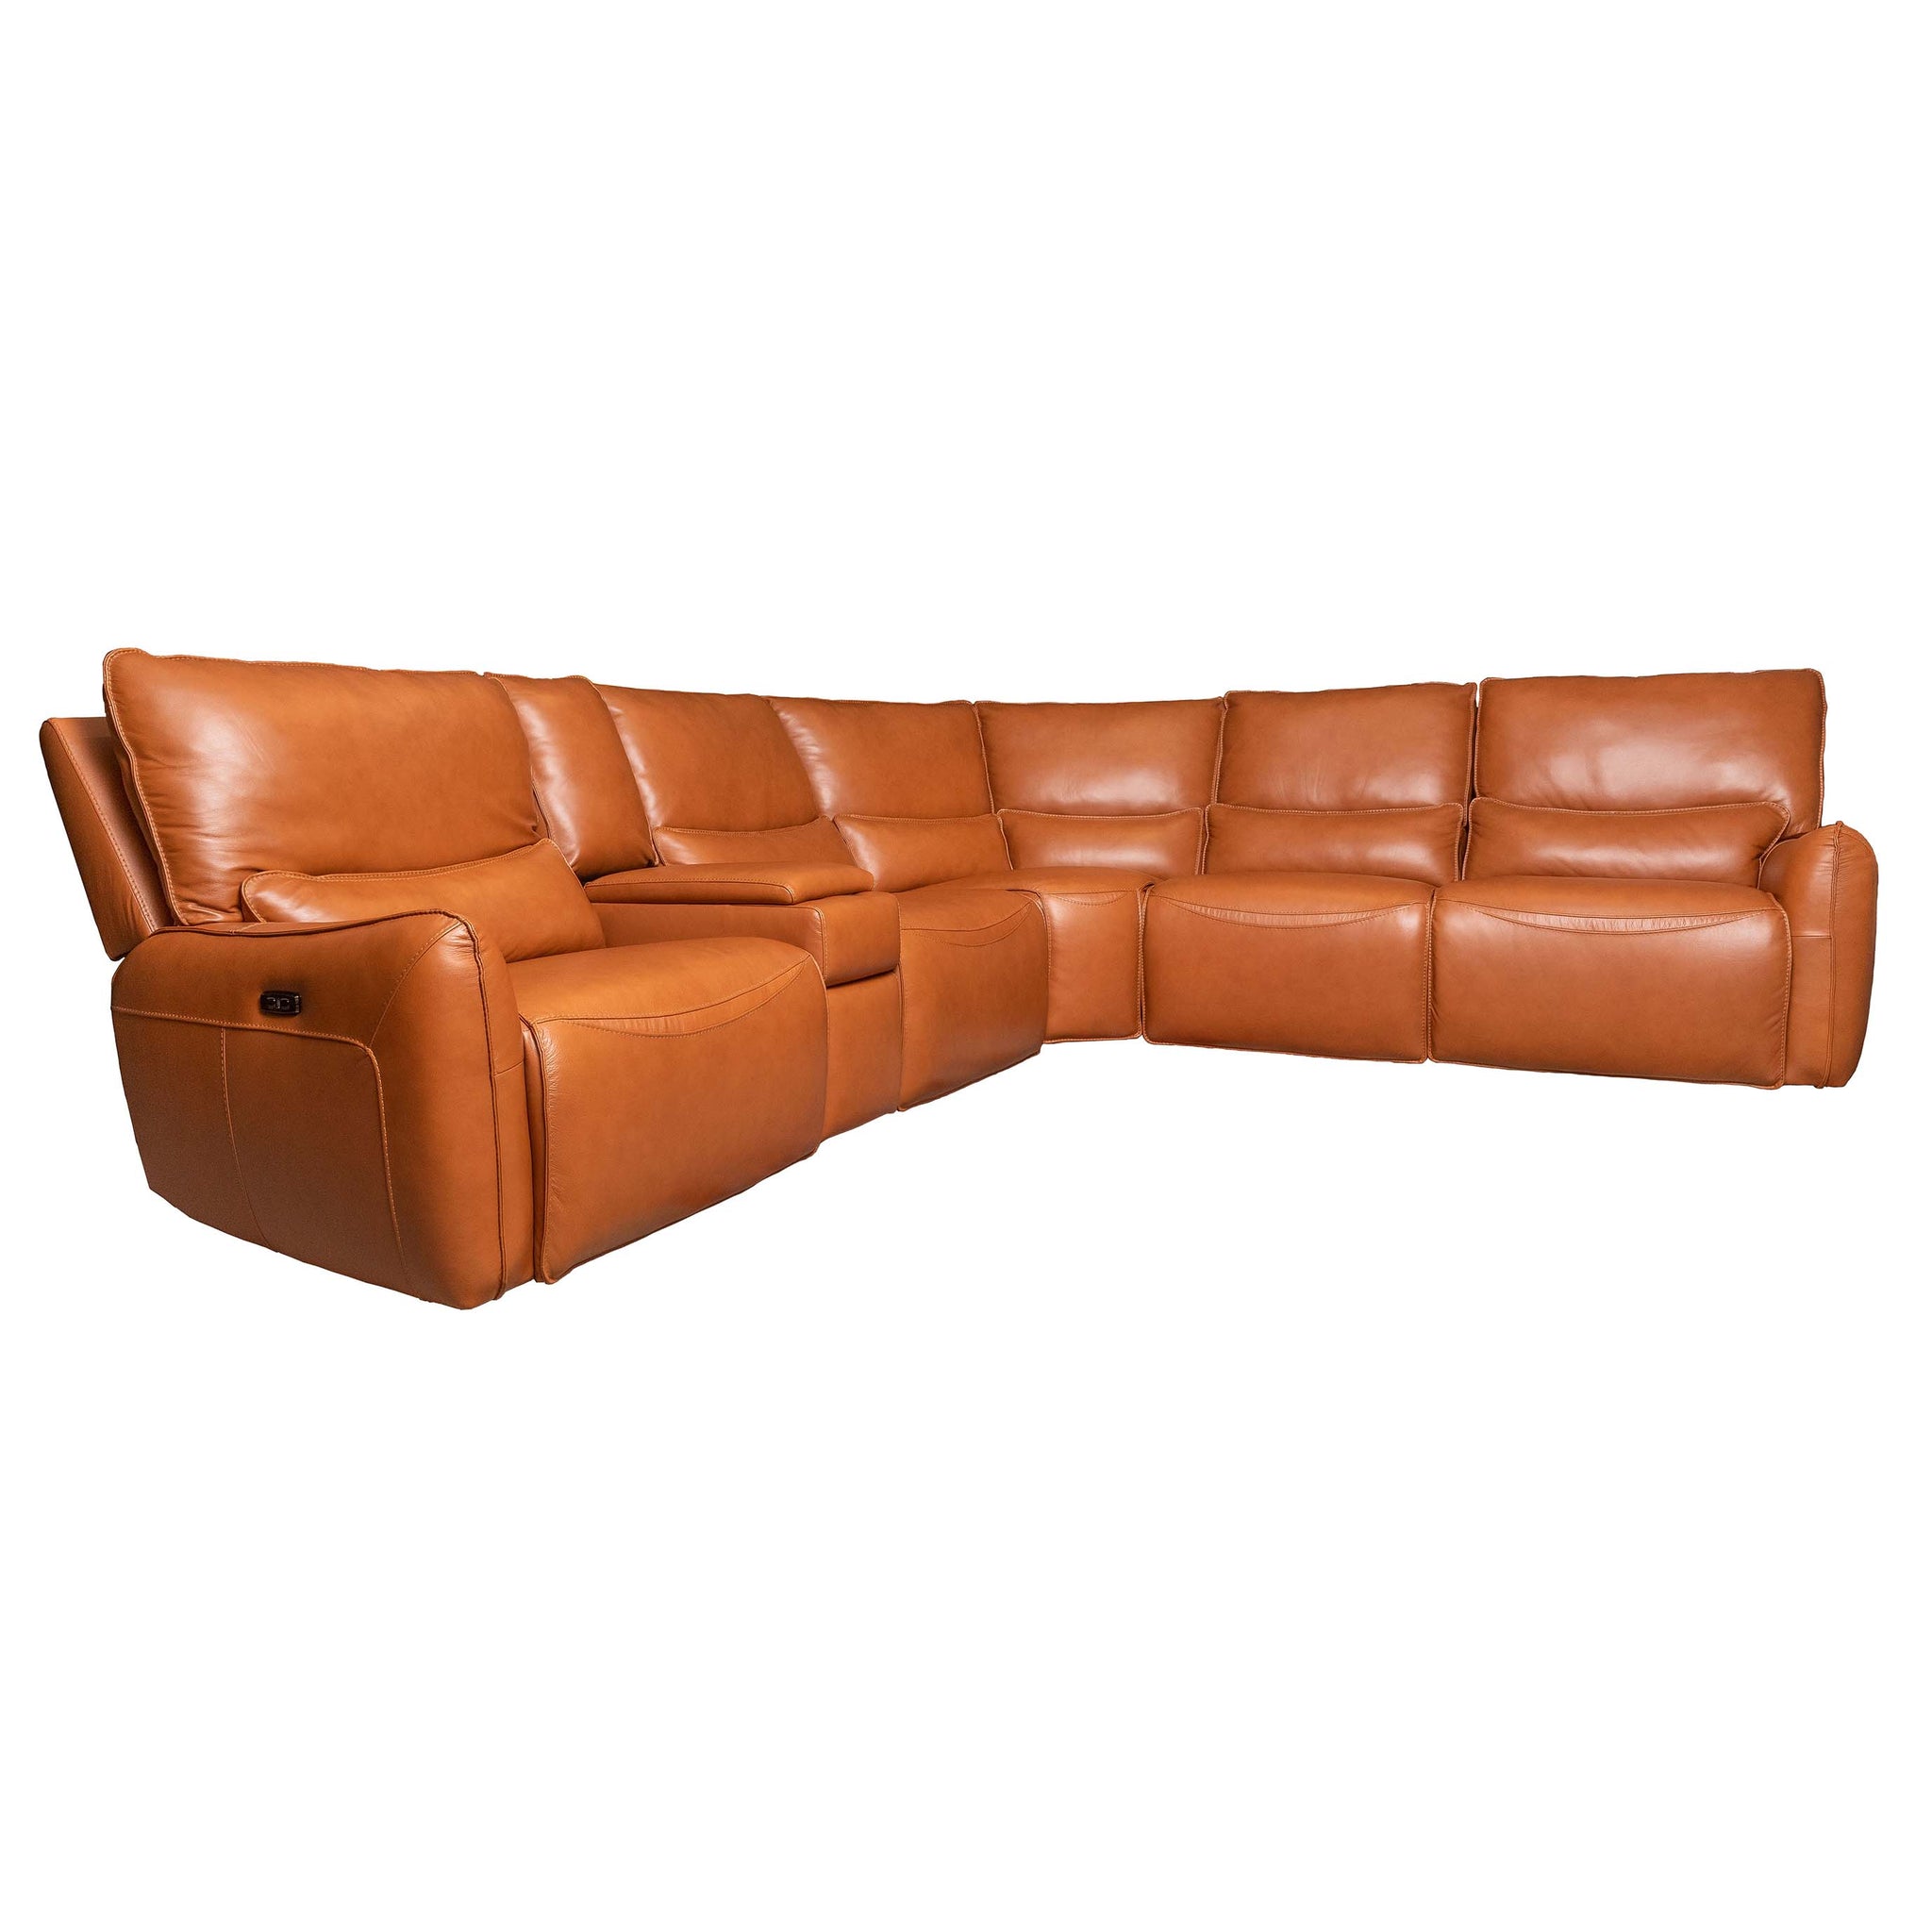 KM-582H Zero Gravity Leather Sectional - Brown